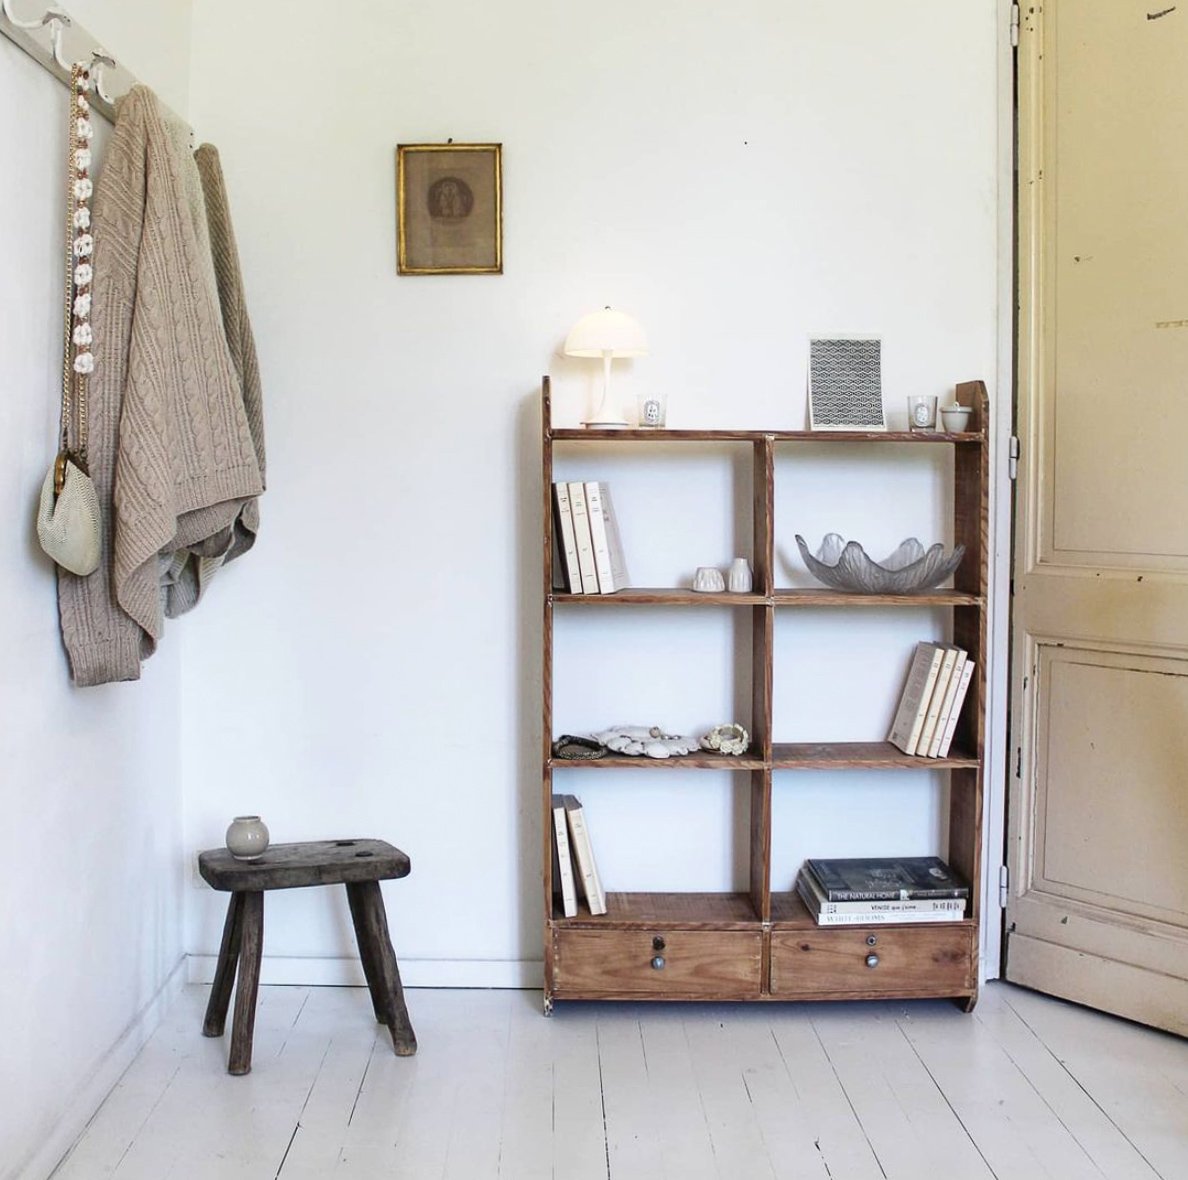 White interior with wooden vintage shelving unit displaying vintage items